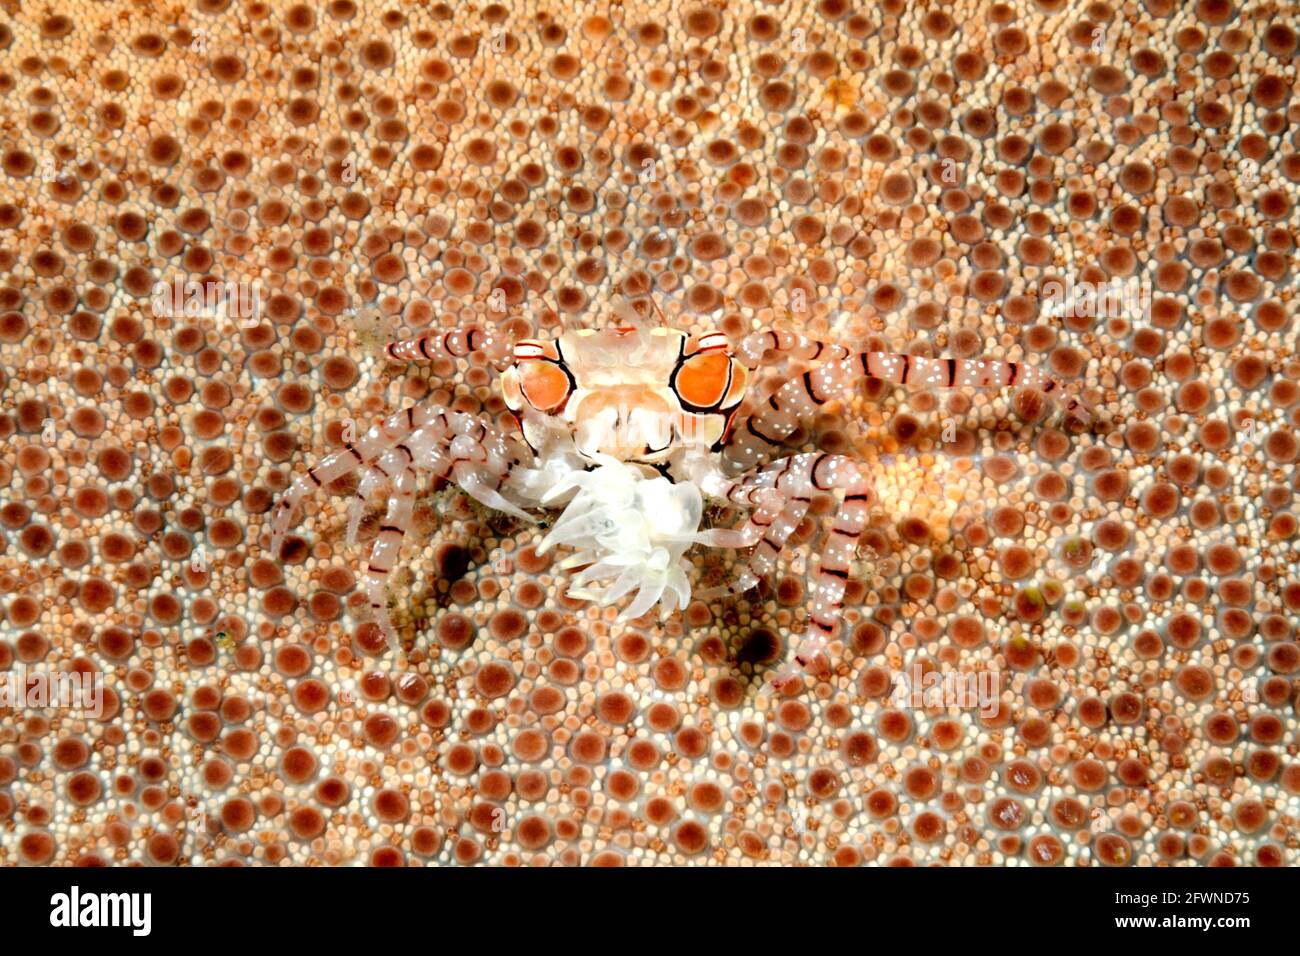 Boxer crab or Pom Pom Crab, Lybia tessellata camouflaged in a sea star and carrying an anemone in its claw. Tulamben, Bali, Indonesia. Bali Sea, Stock Photo